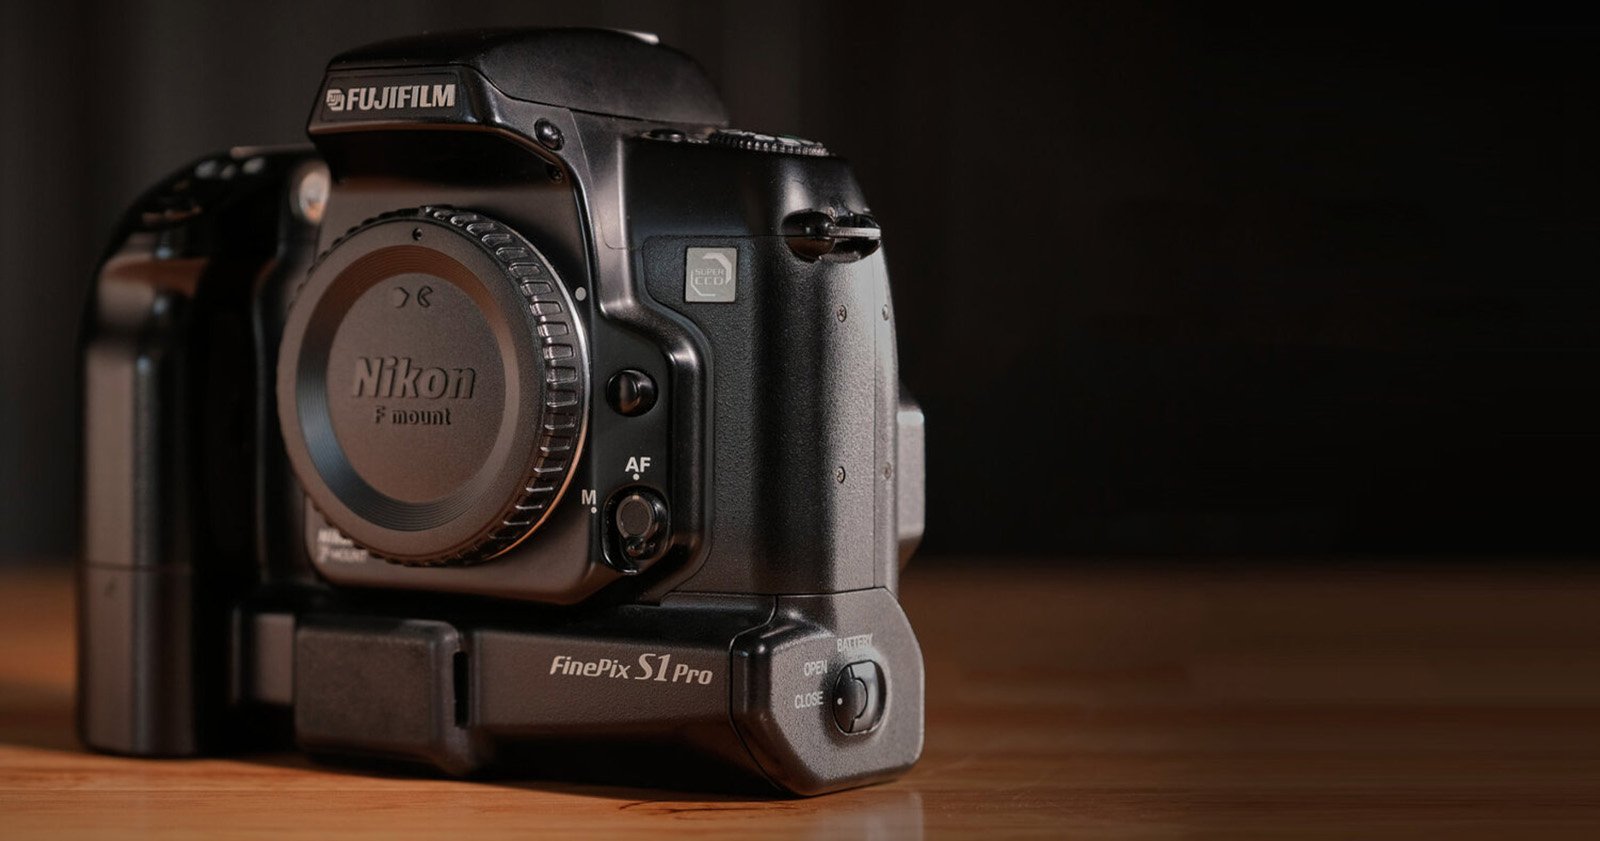 20 Years with Fujifilm: A Look Back at the FinePix S1 Pro